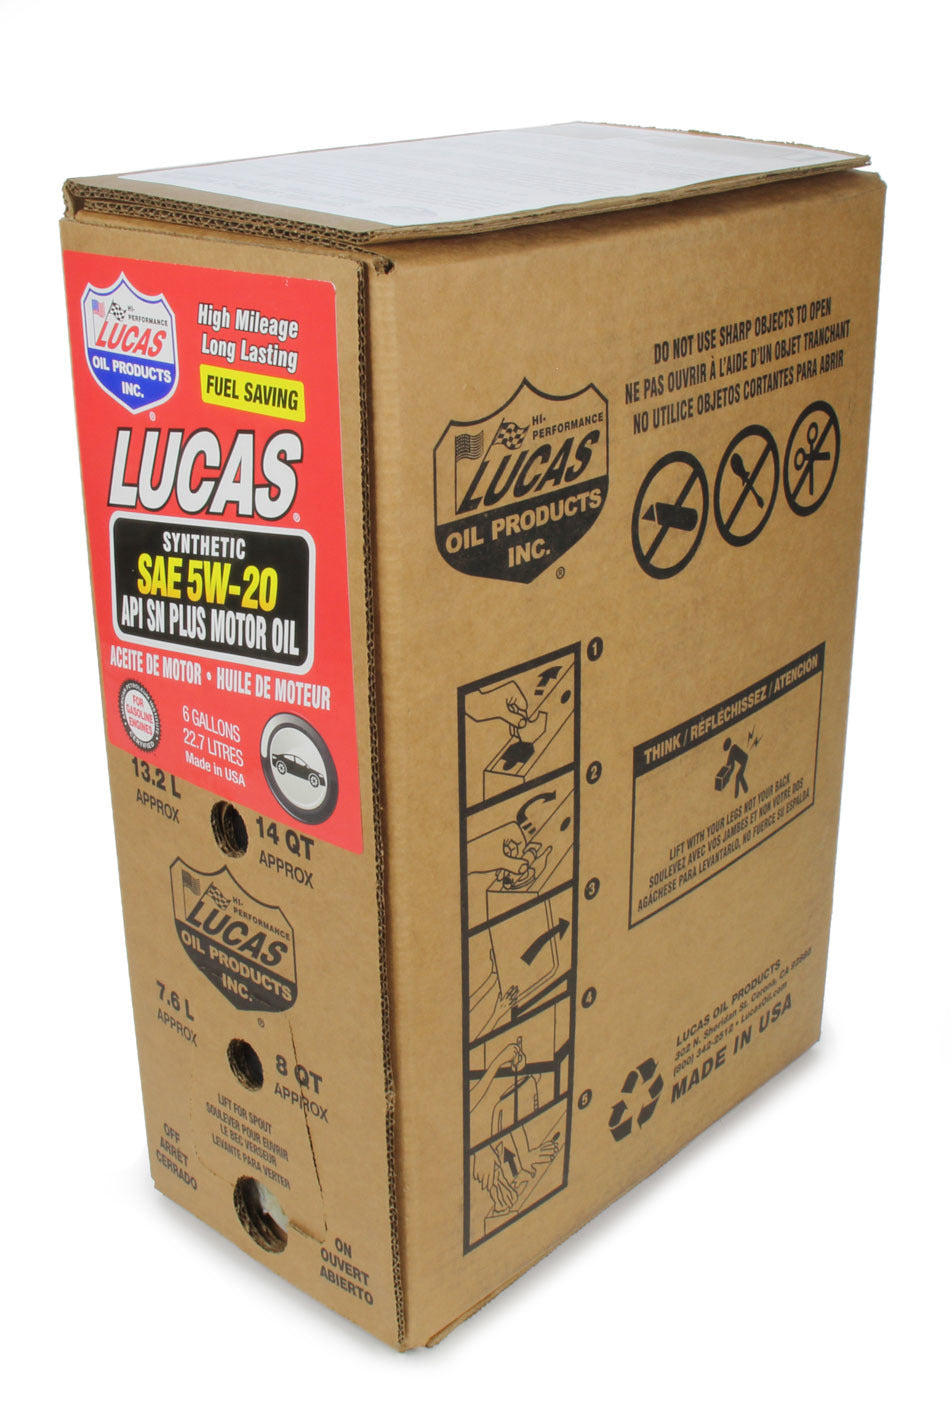 Synthetic SAE 5W20 Oil 6 Gallon Bag In Box